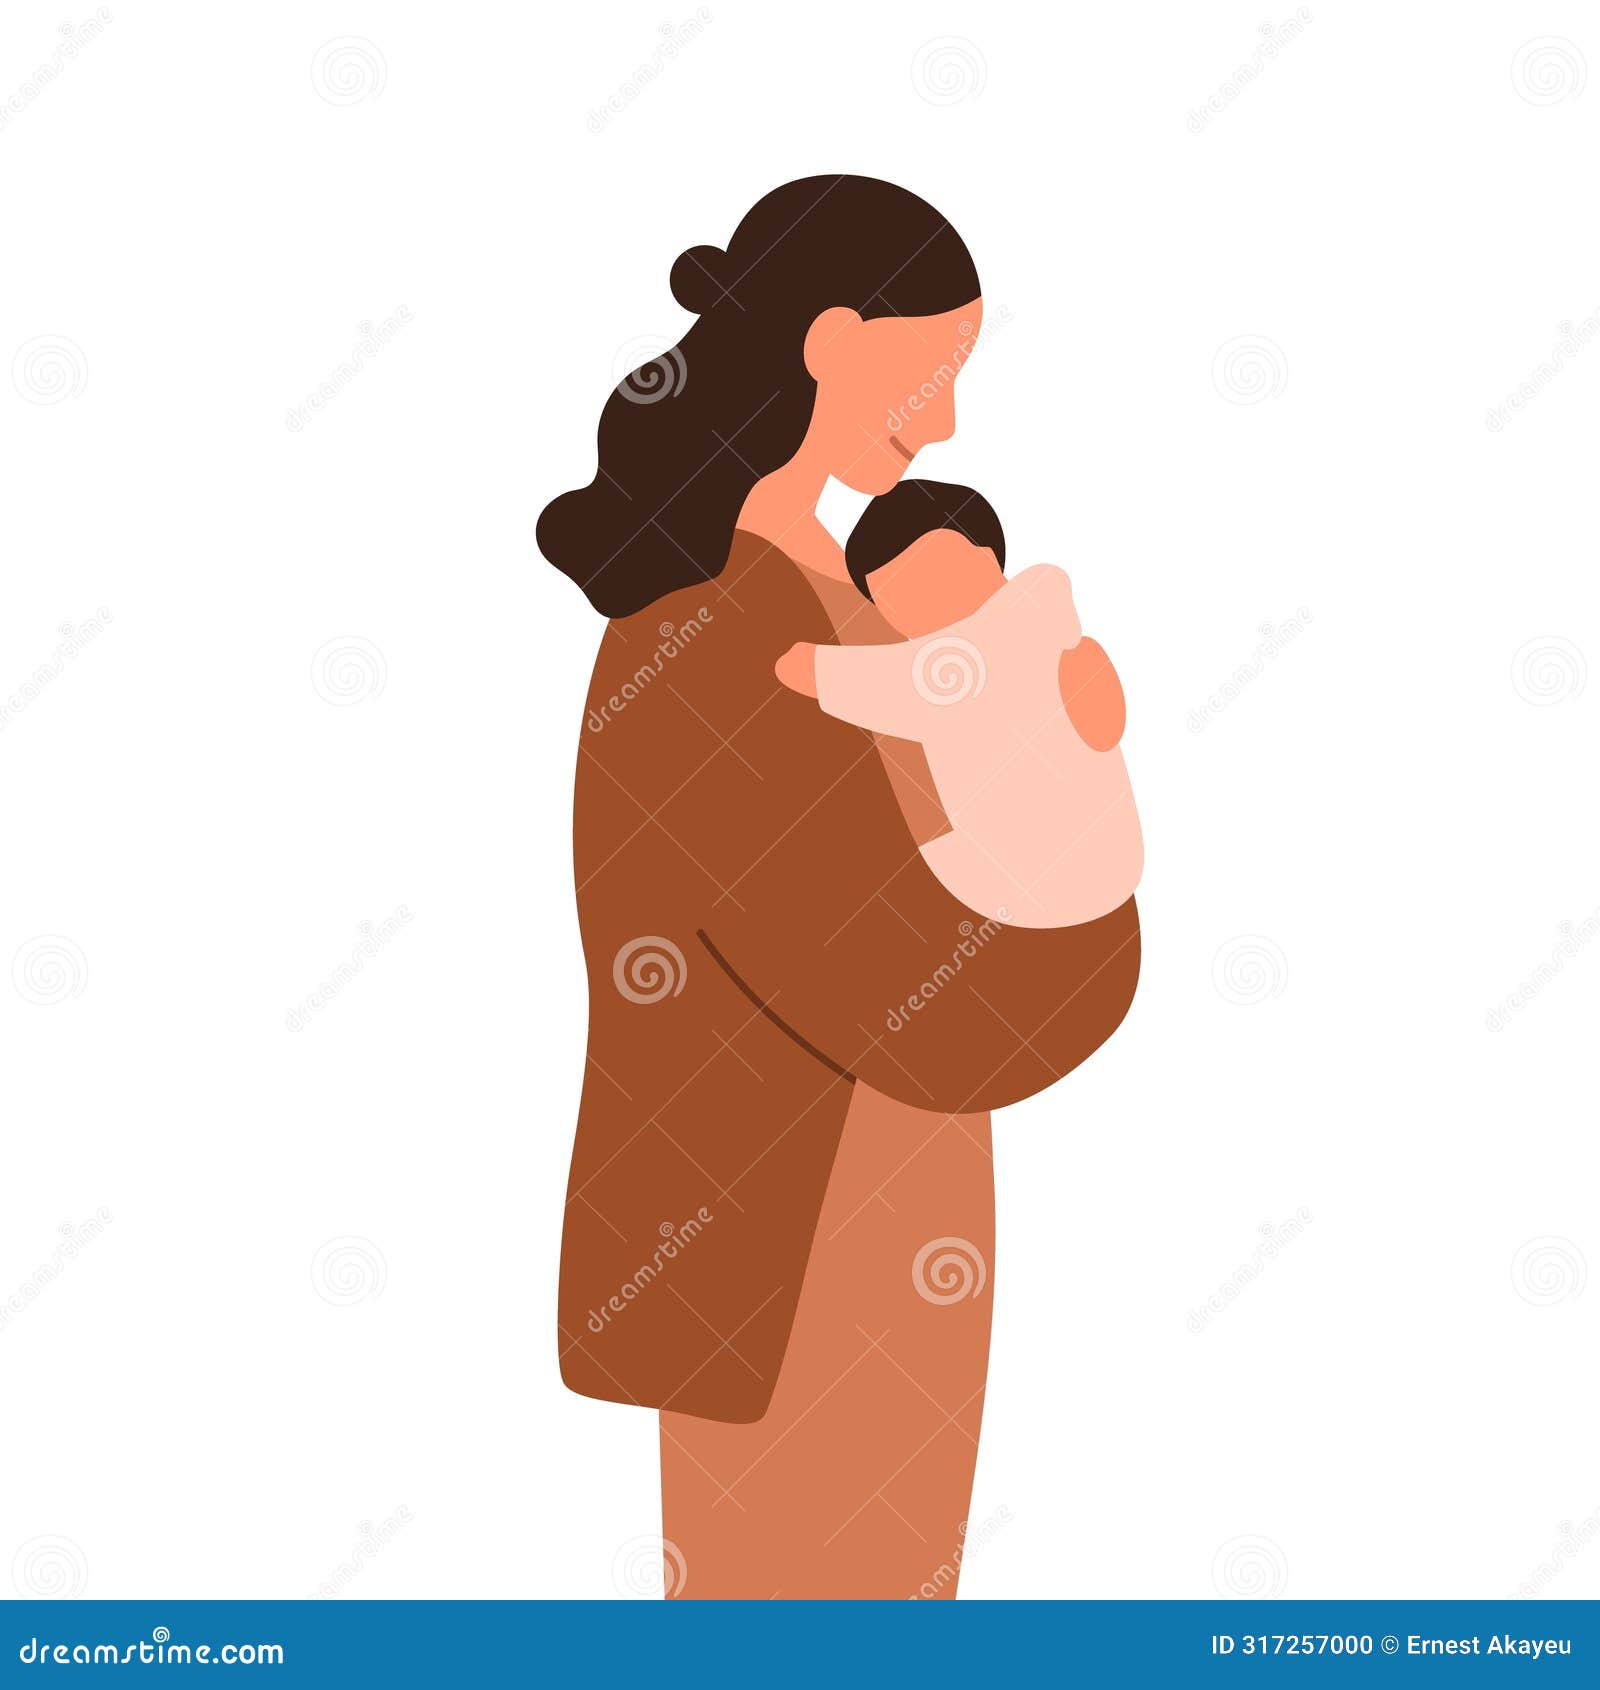 mother and baby. young woman mom holding newborn child in arms. female carrying, hugging infant kid in hands. childbirth